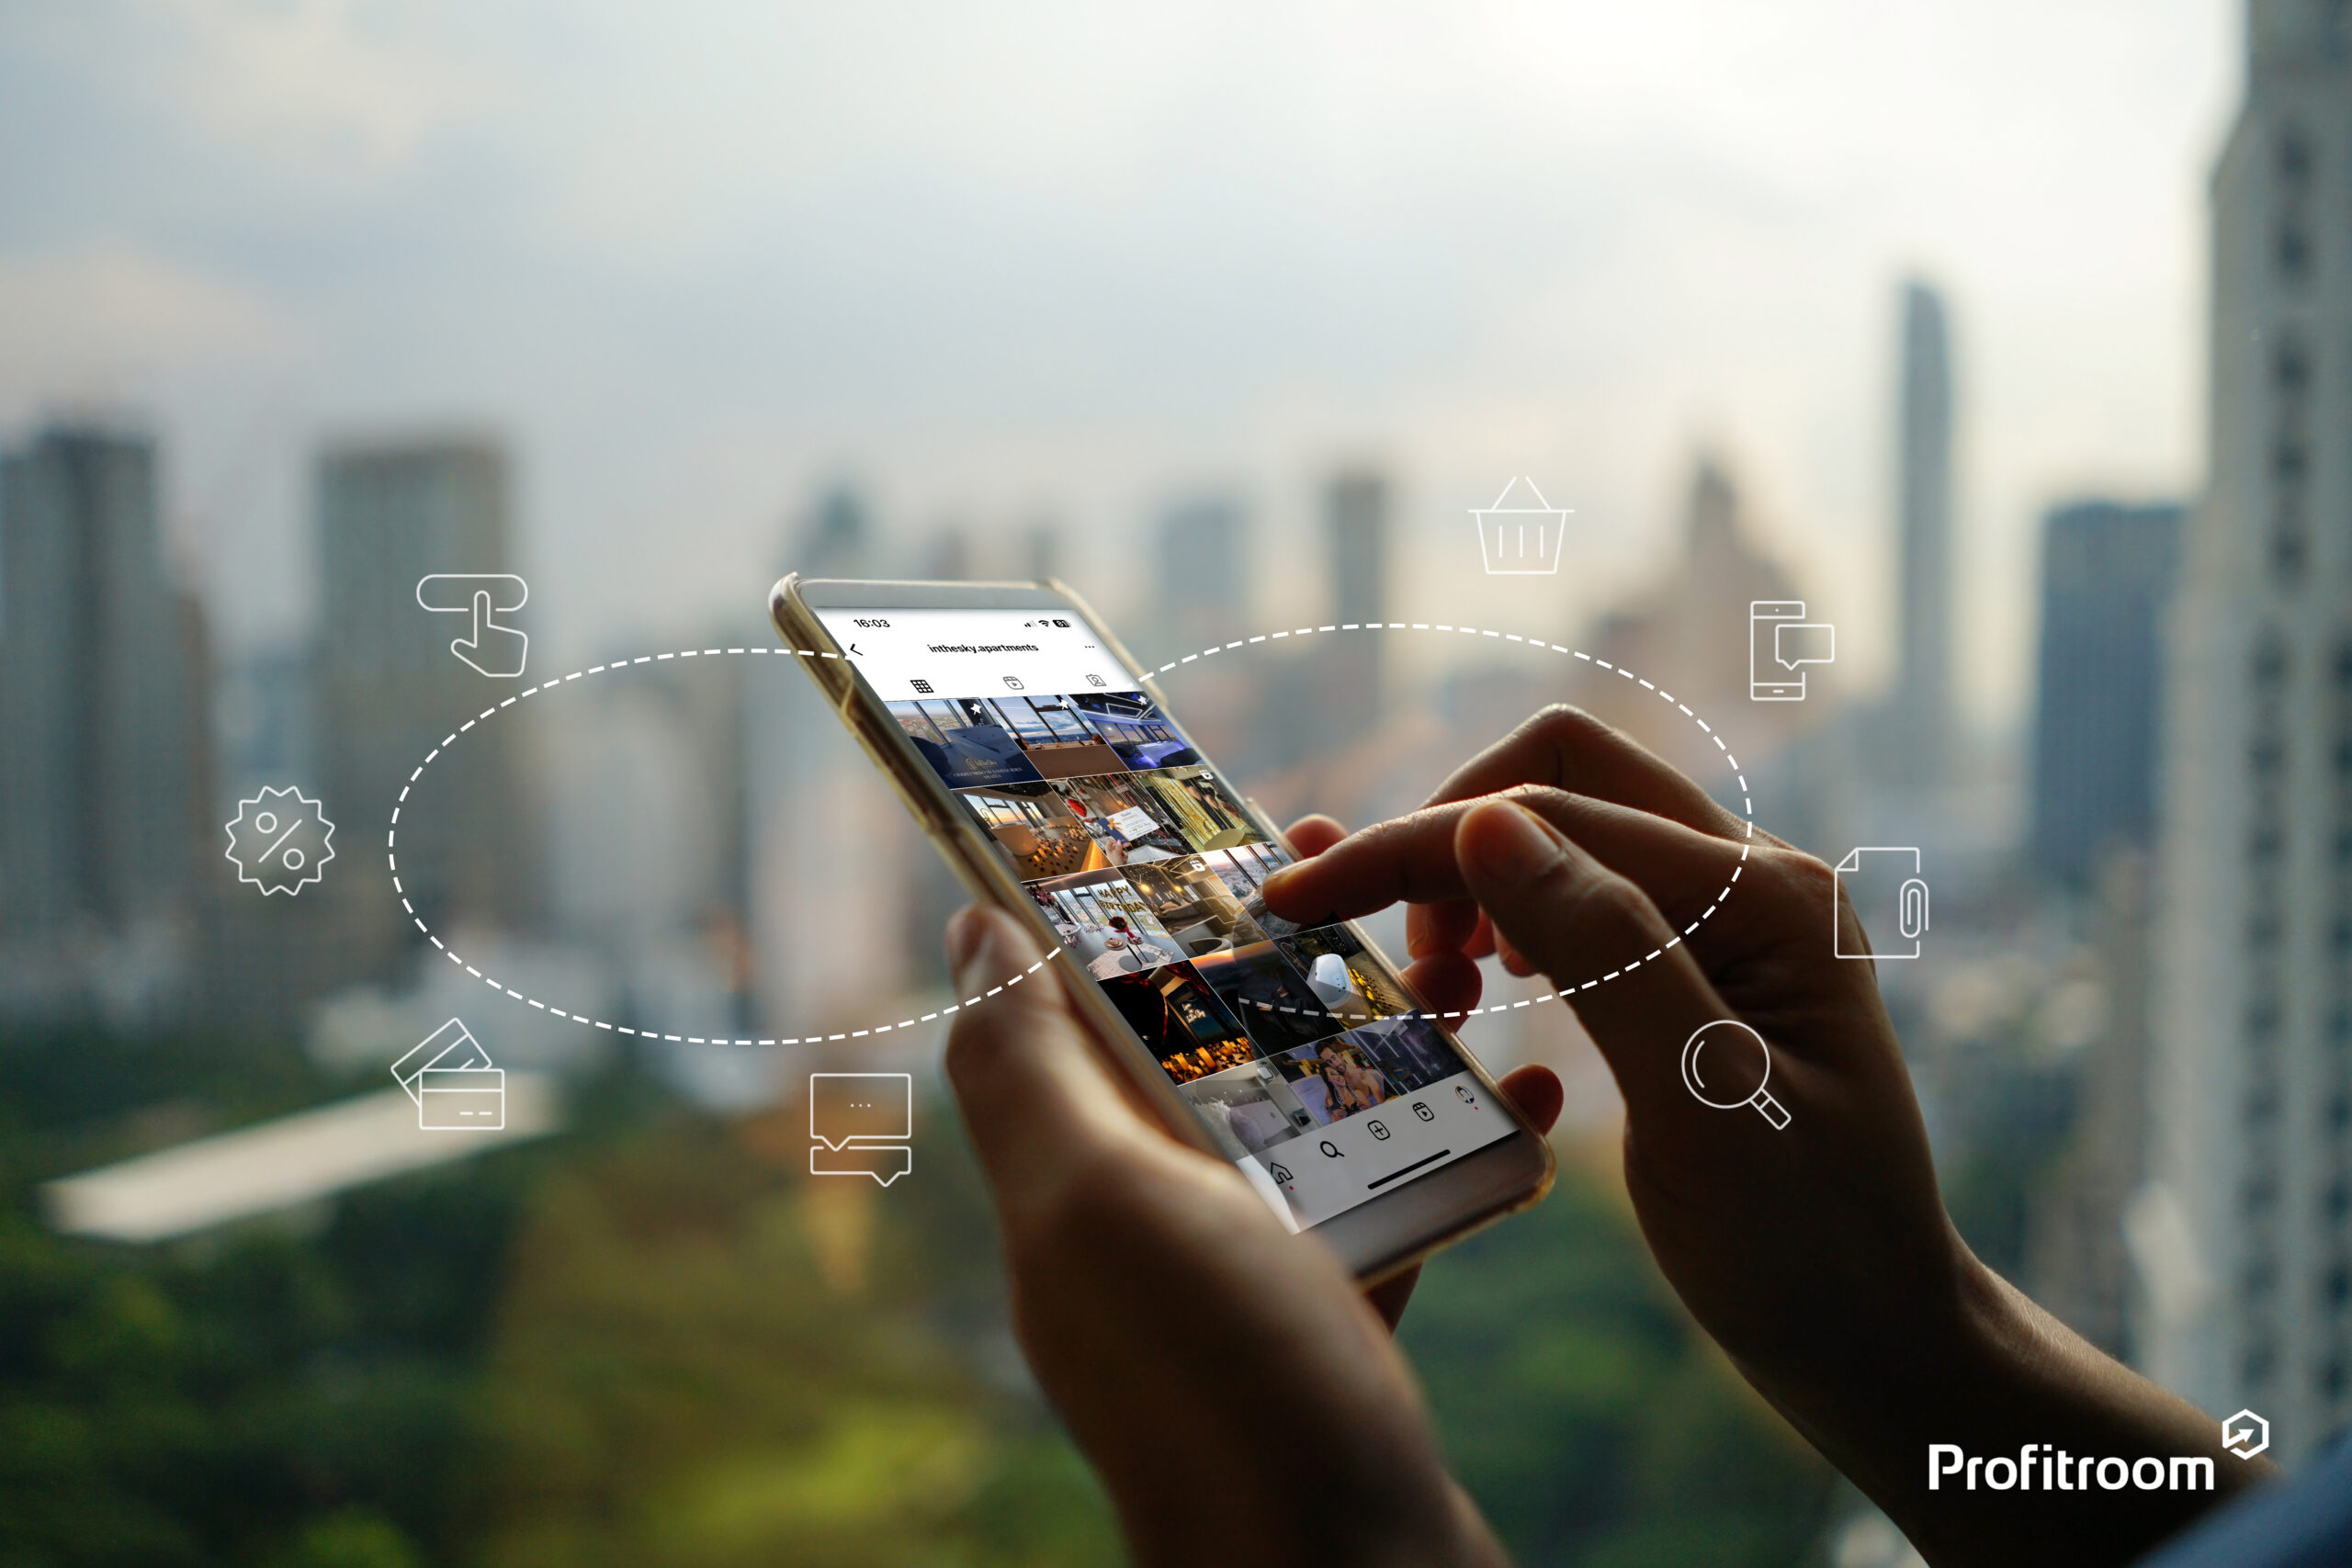 Female hand holding, using smartphone on blurred background of cityscape with high rise business metropolis building and green zone of trees in the park. Technology's impact on people's live concept.